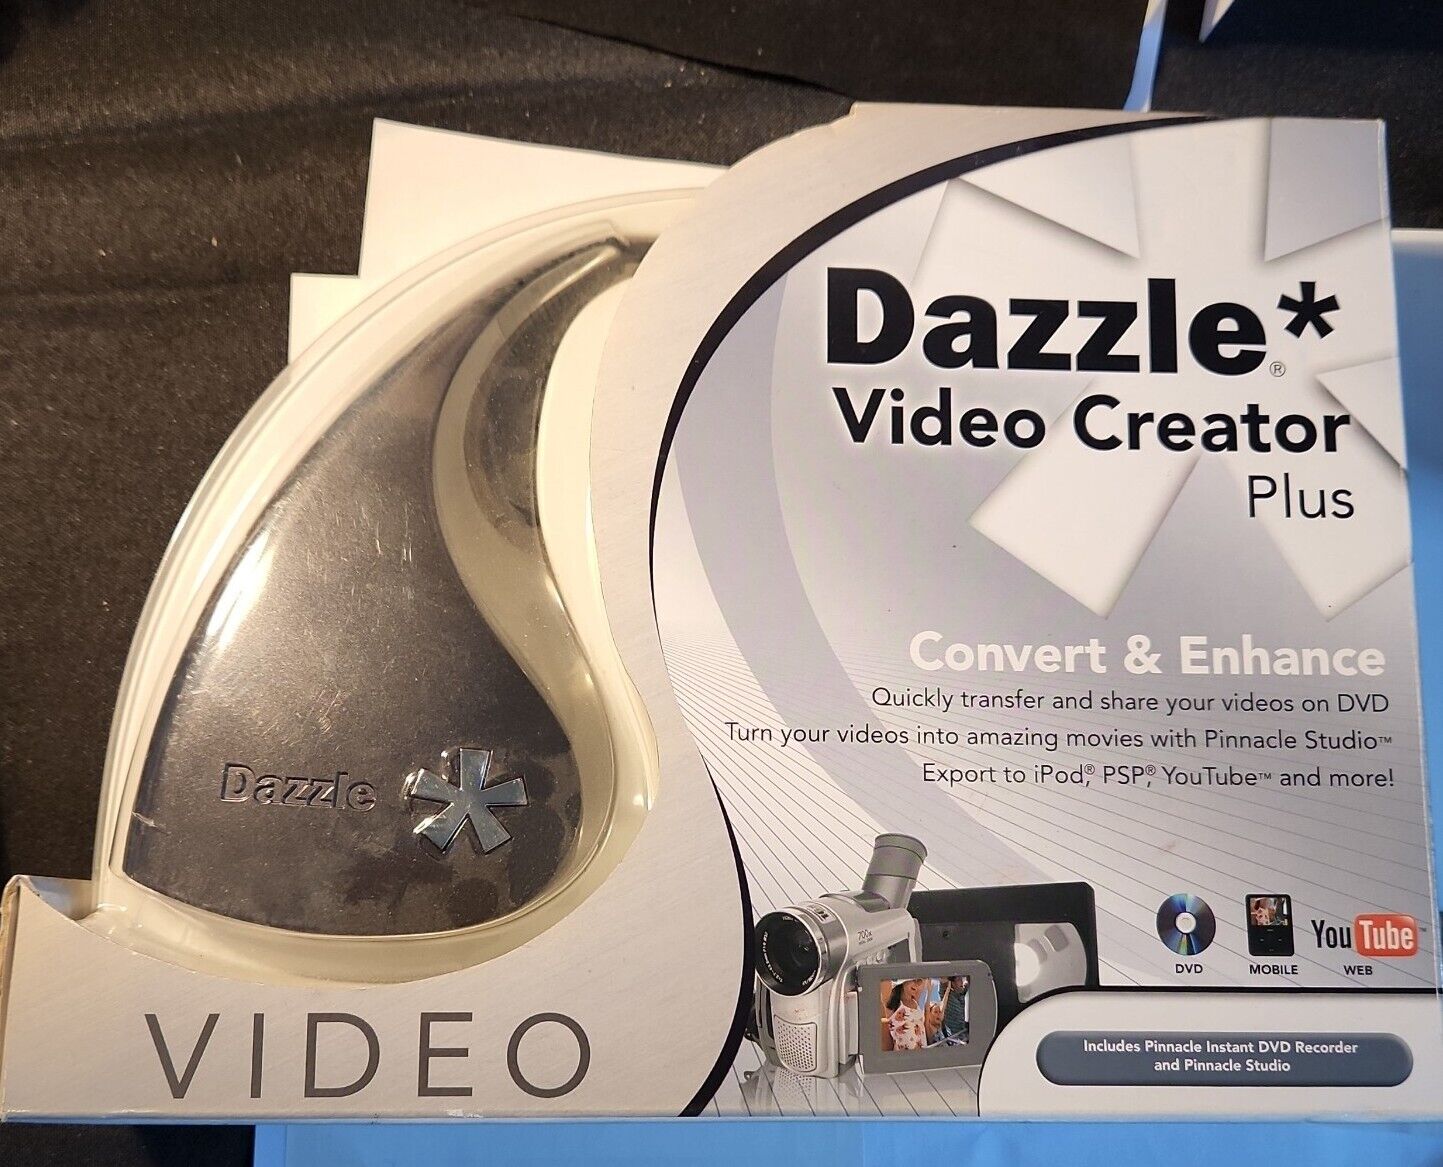 Dazzle Video Creator Plus Convert And Enhance - Does Not Include Software